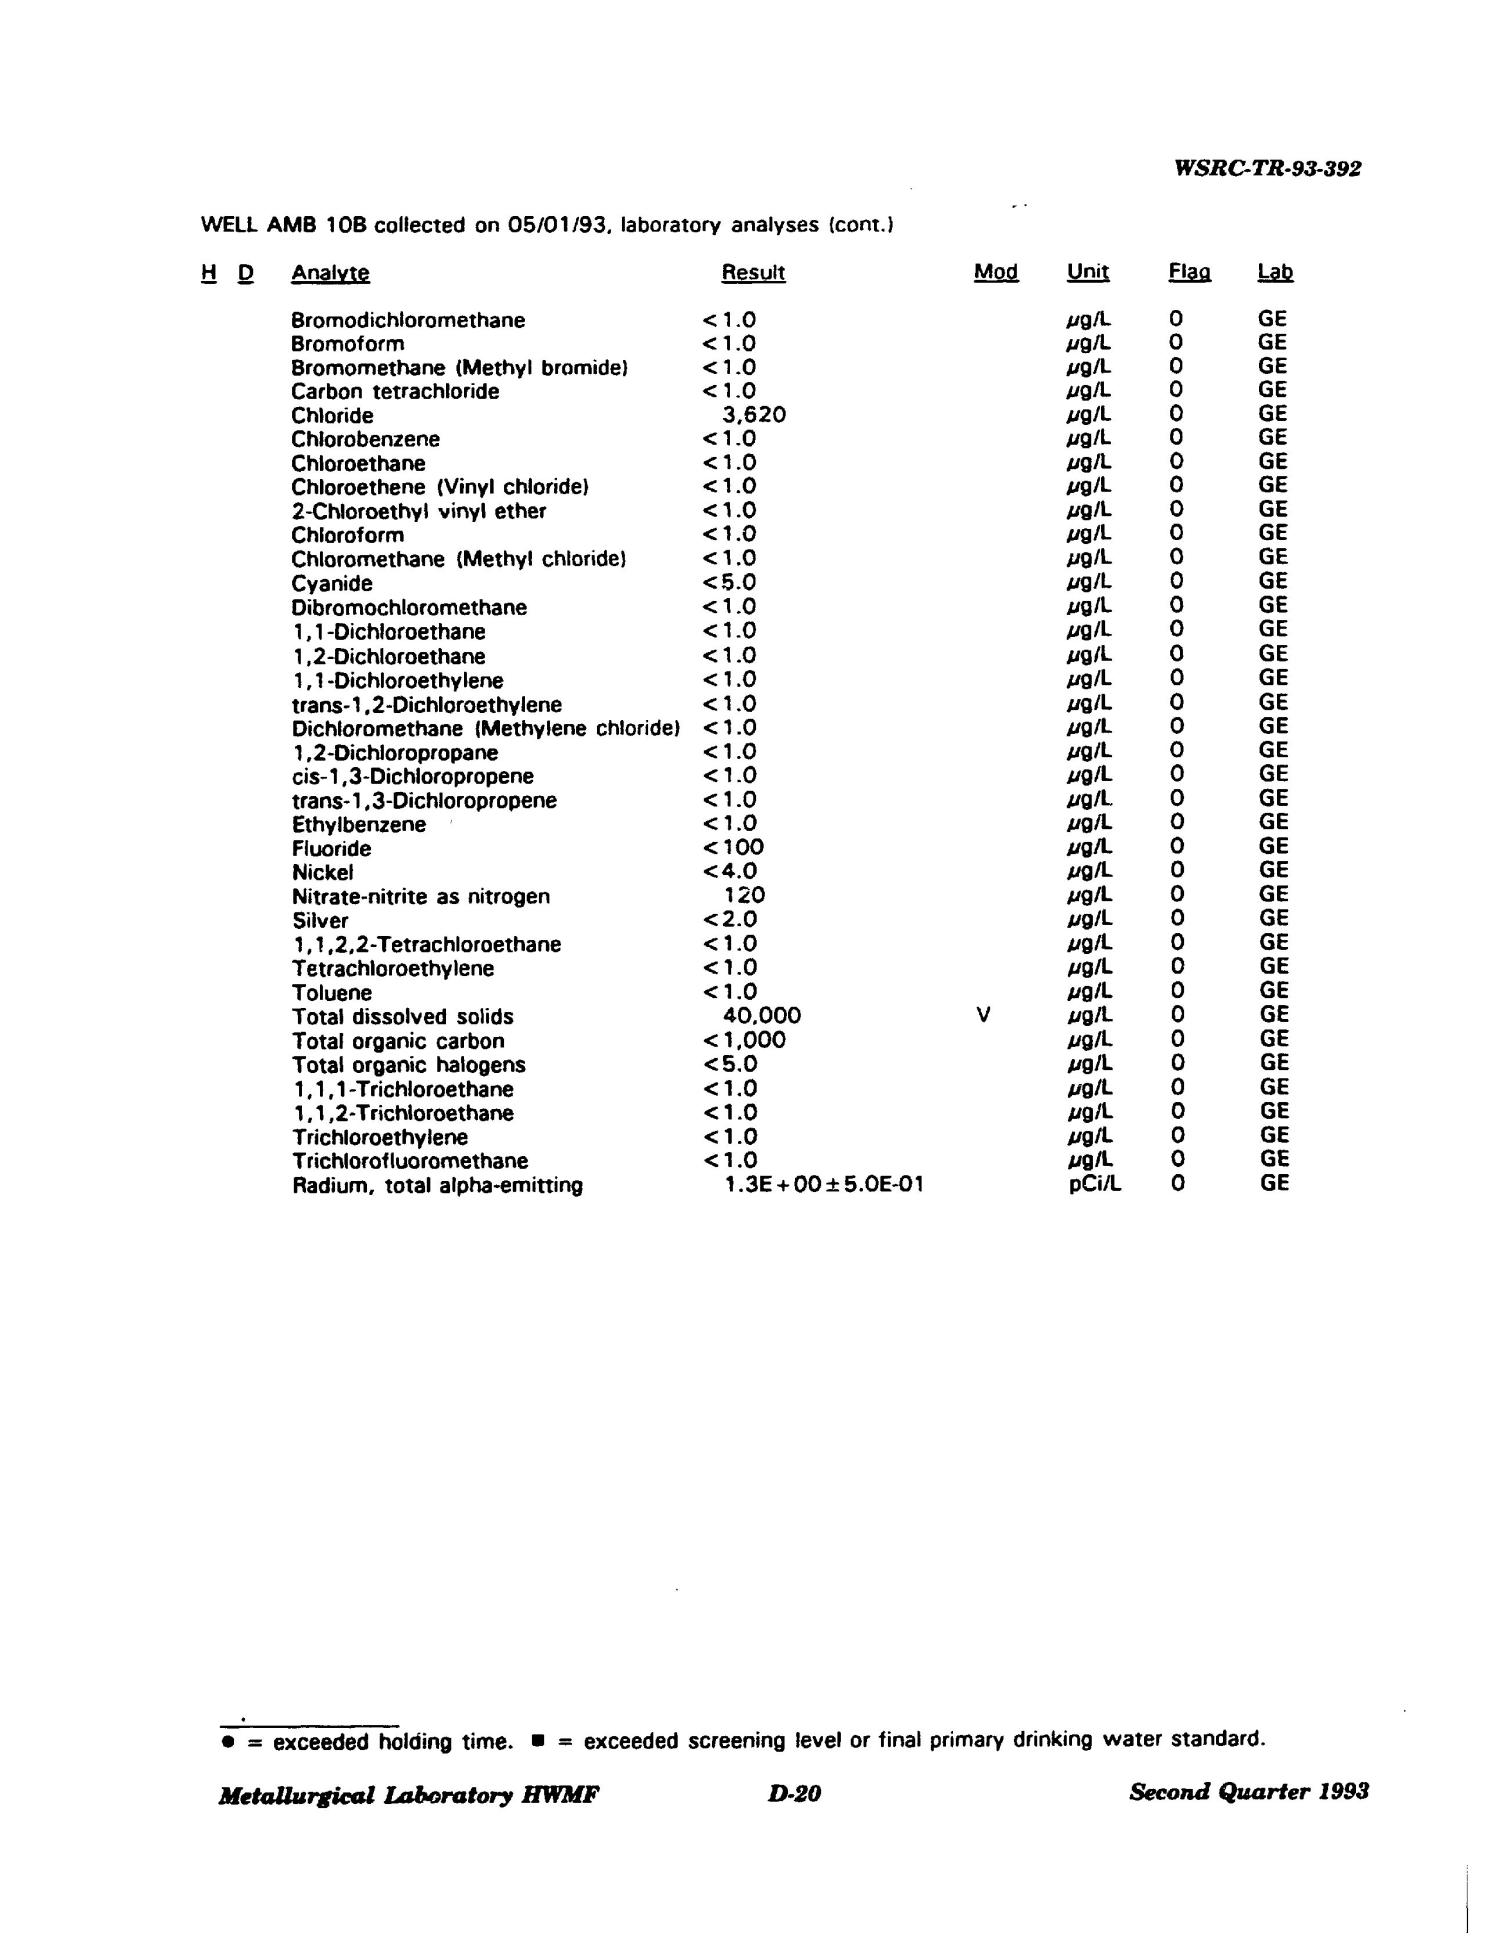 Metallurgical Laboratory Hazardous Waste Management Facility groundwater monitoring report. Second quarter 1993
                                                
                                                    [Sequence #]: 66 of 257
                                                